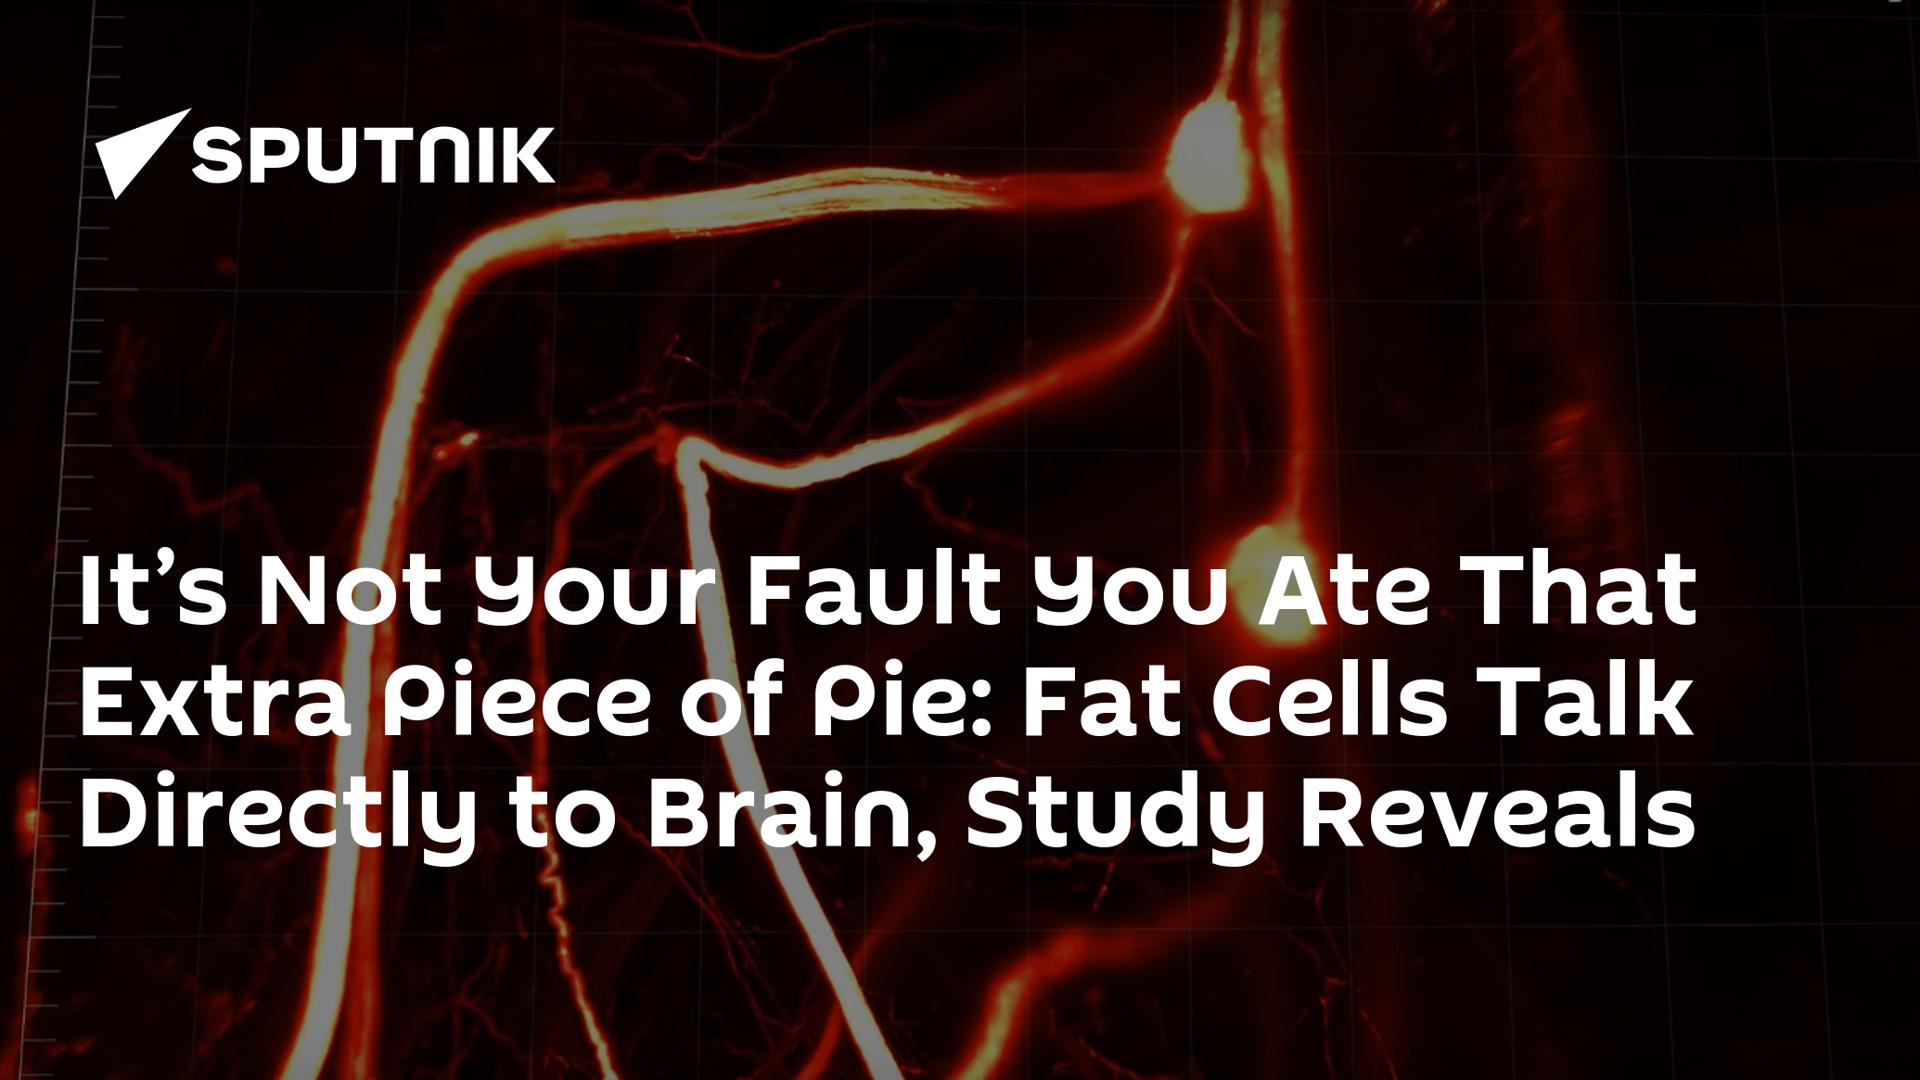 It’s Not Your Fault You Ate That Extra Piece of Pie: Fat Cells Talk Directly to Brain, Study Reveals